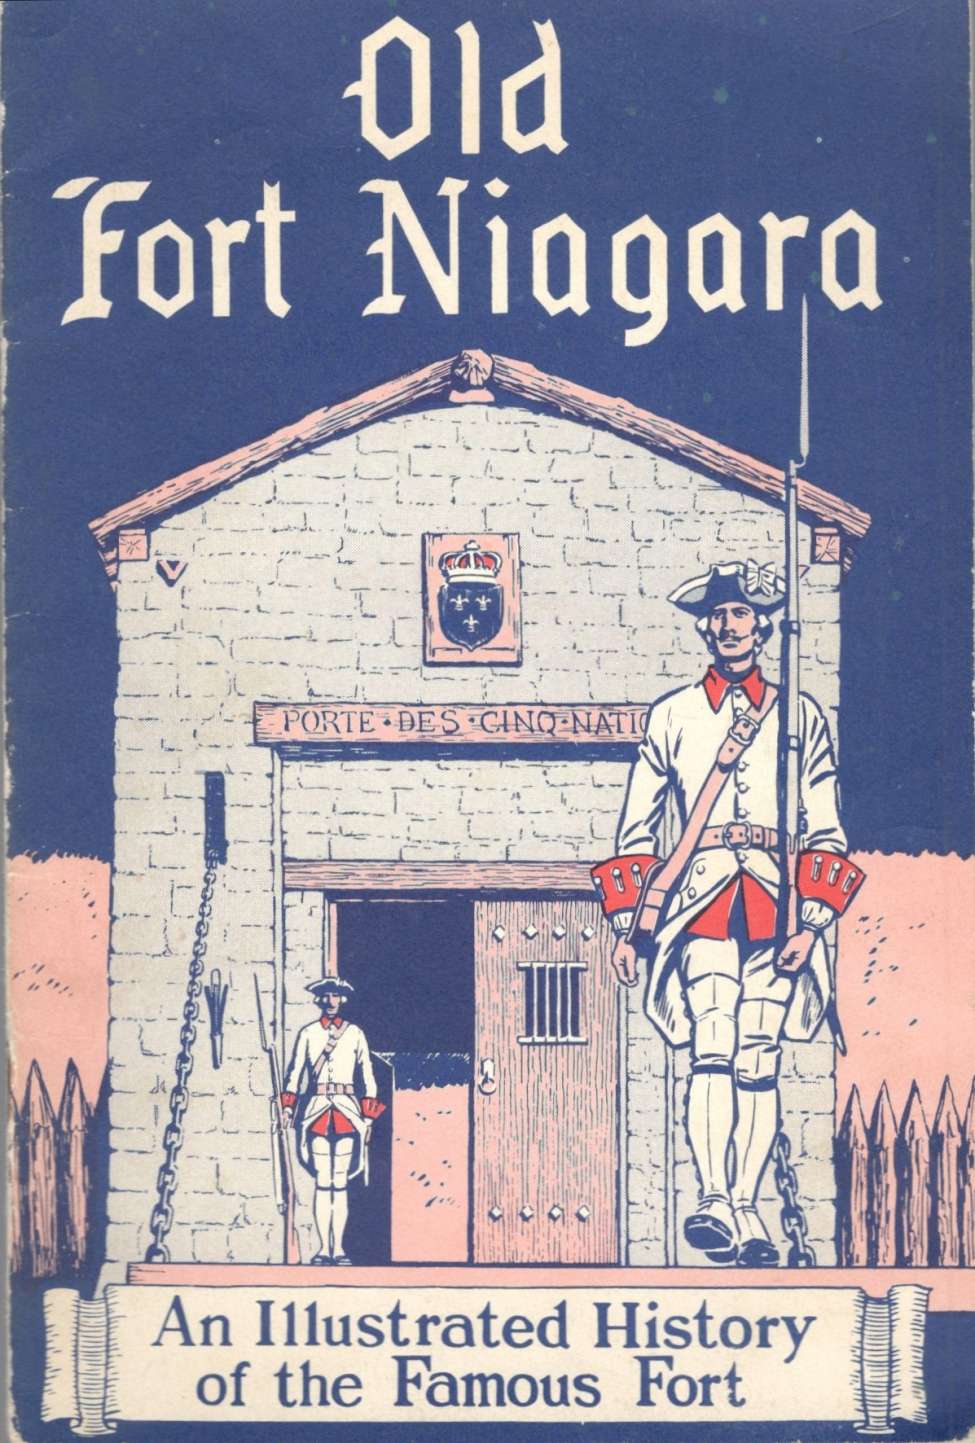 Comic Book Cover For Old Fort Niagara